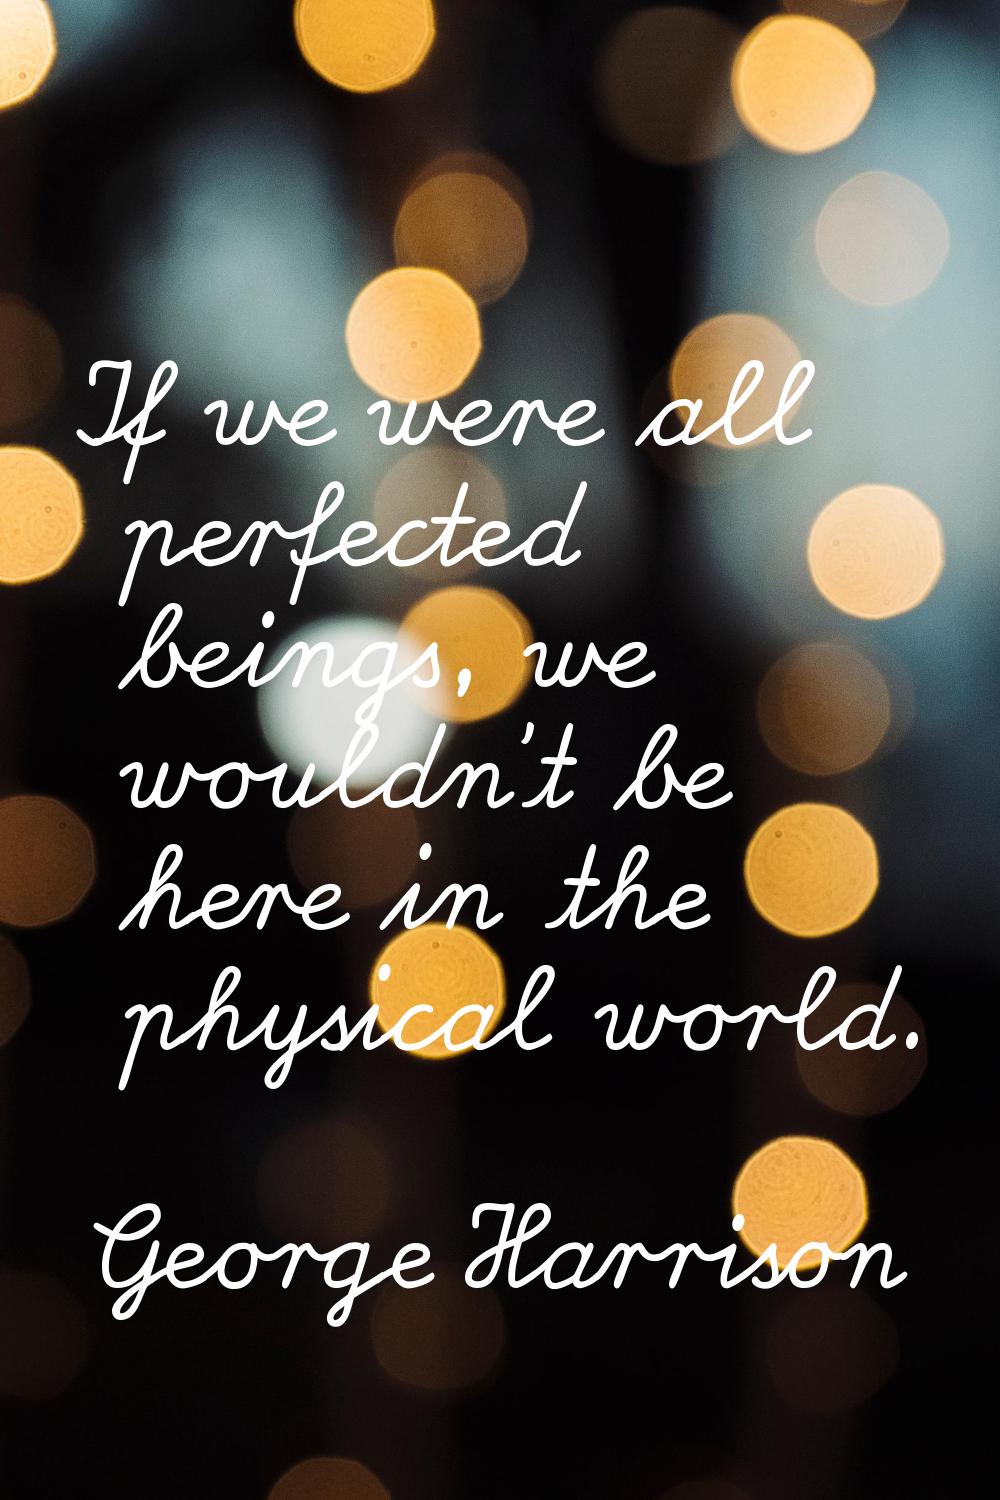 If we were all perfected beings, we wouldn't be here in the physical world.